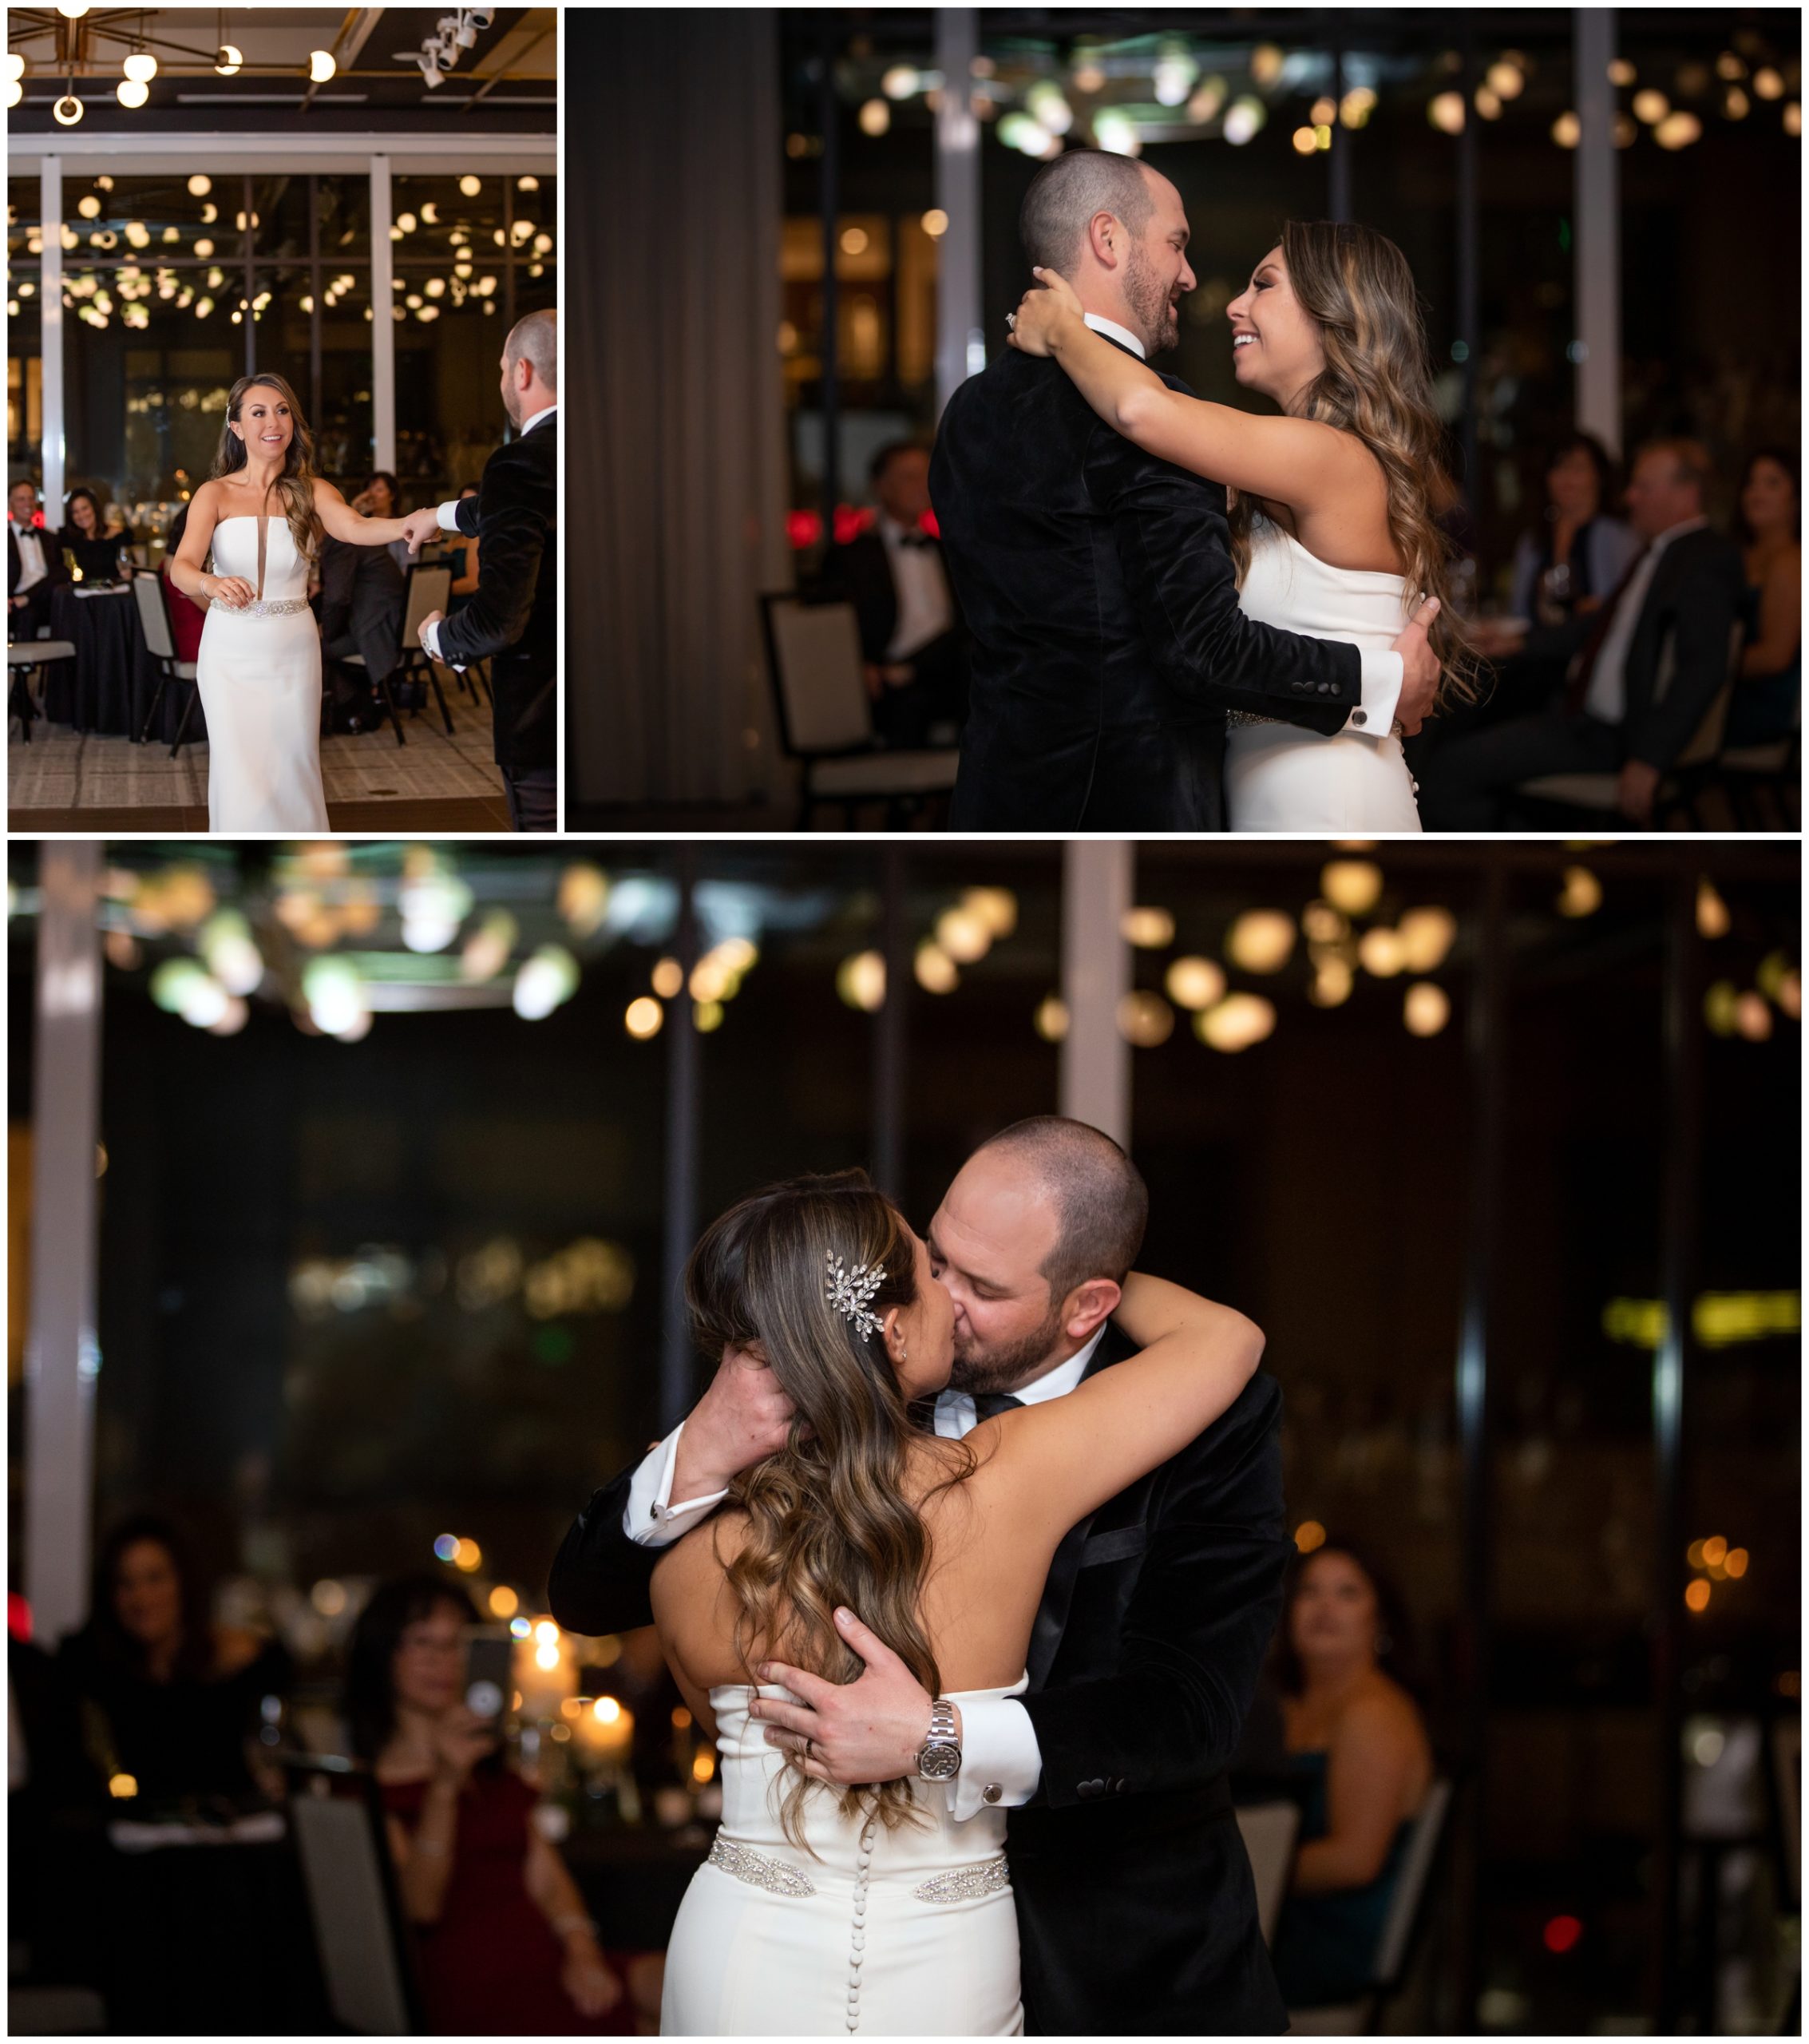 couple's first dance during Denver wedding reception at the Halcyon Hotel Cherry Creek